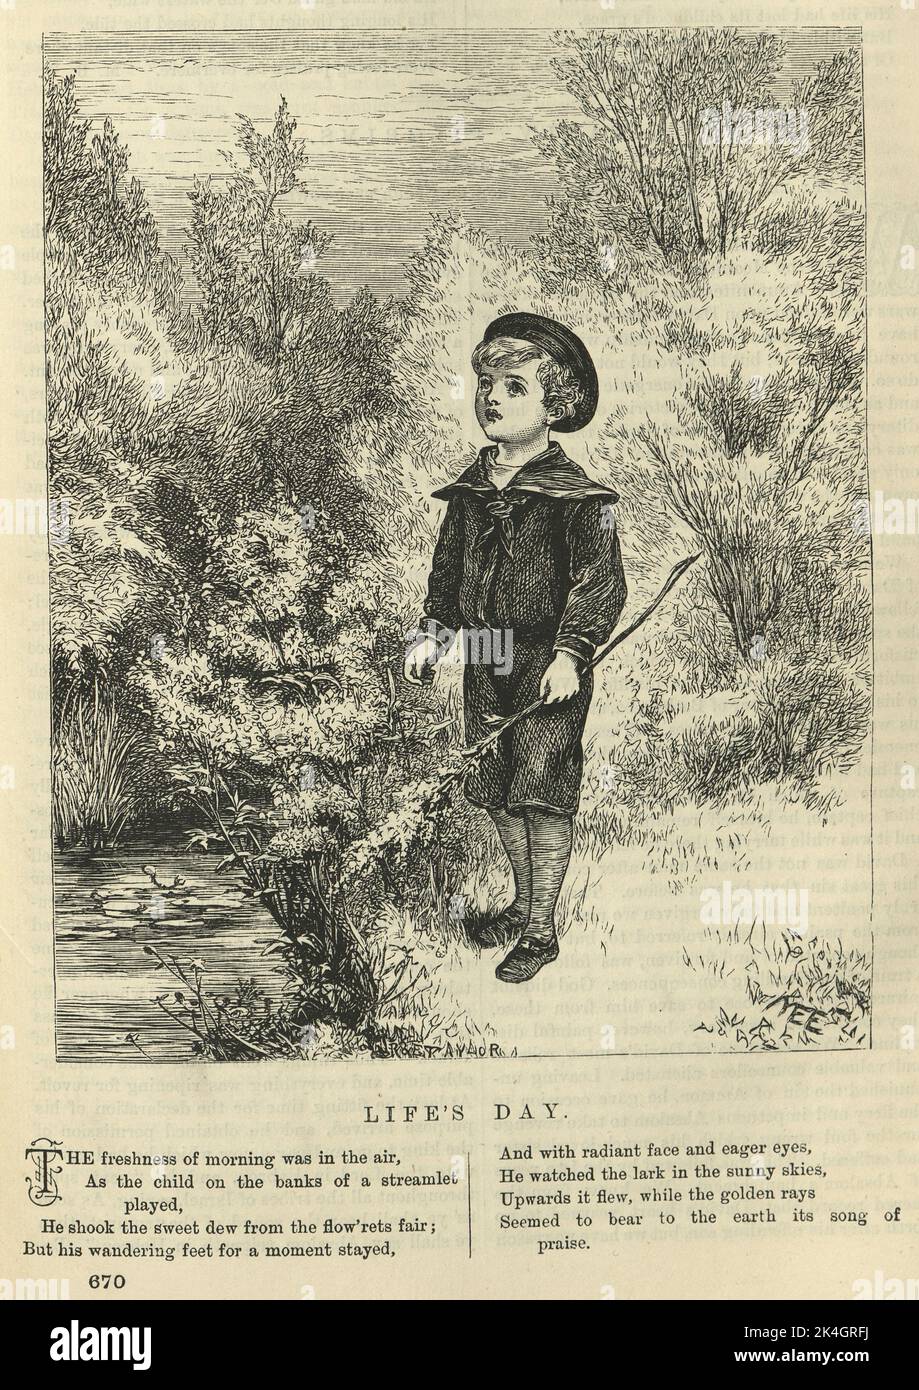 Illustration for Victorian poem Life's Day, 1870s, 19th Century, Little boy playing outside in countyside Stock Photo